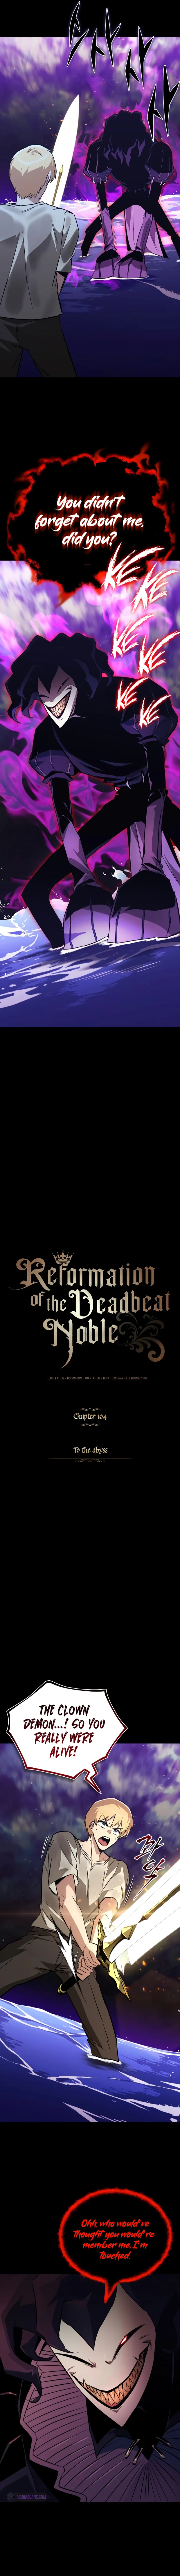 Reformation of the Deadbeat Noble - Chapter 104 Page 5